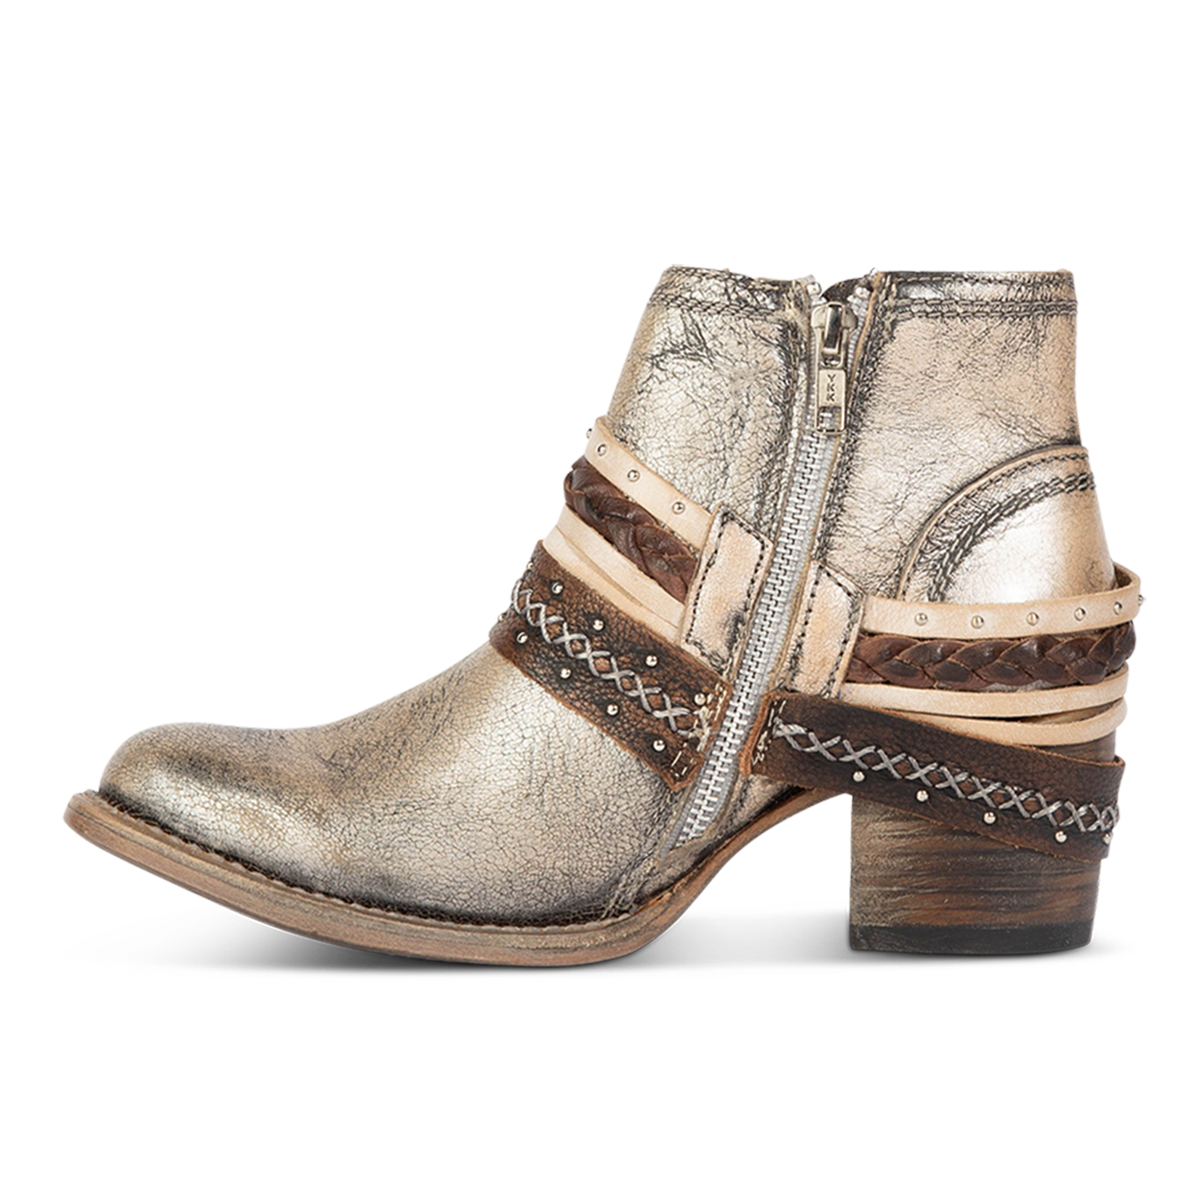 Inside view showing working brass zip closure and embellished decorative belts on FREEBIRD women's Sabelle pewter bootie